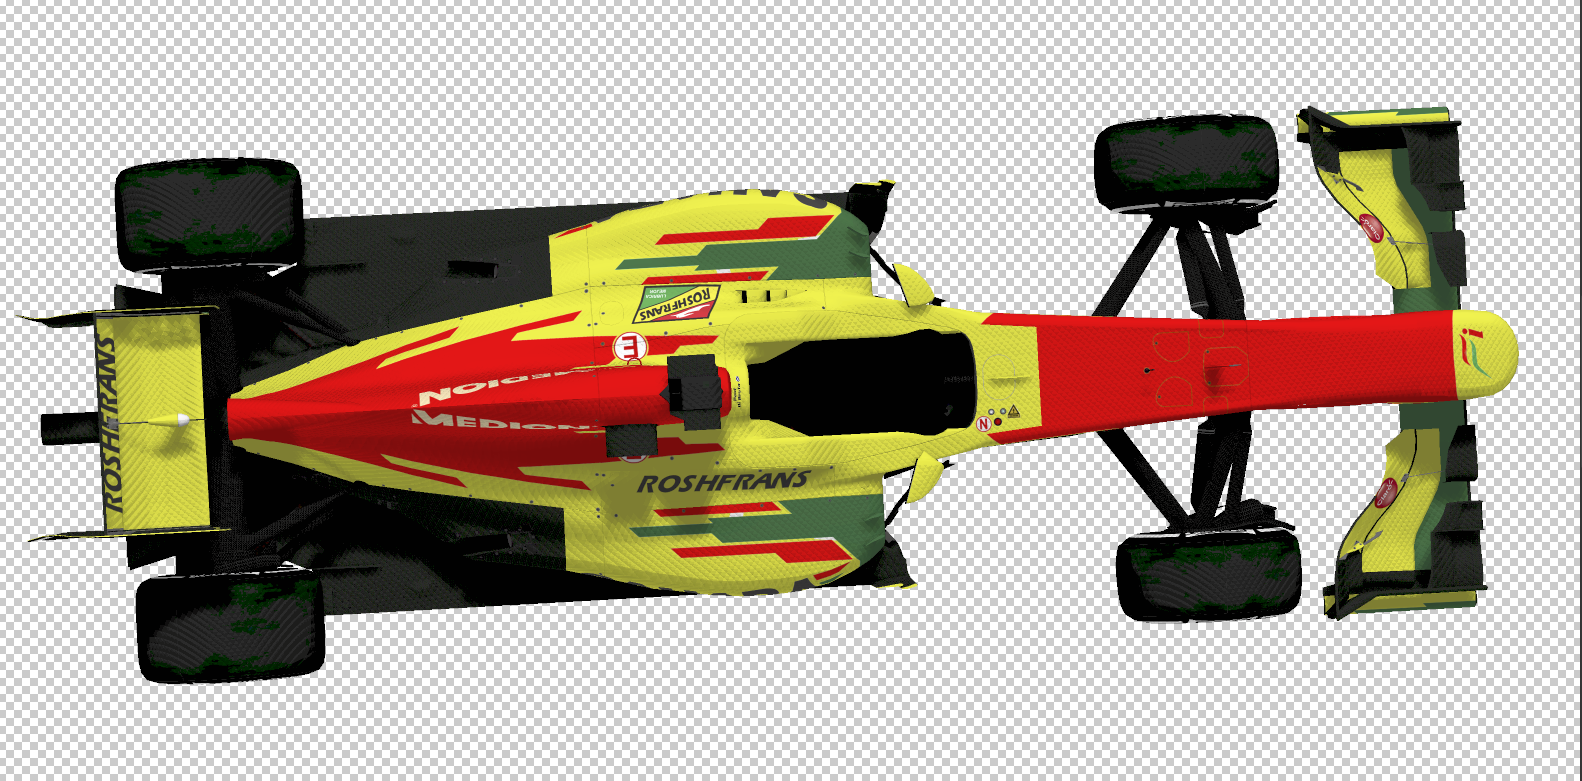 Force India Roshfrans Top.PNG